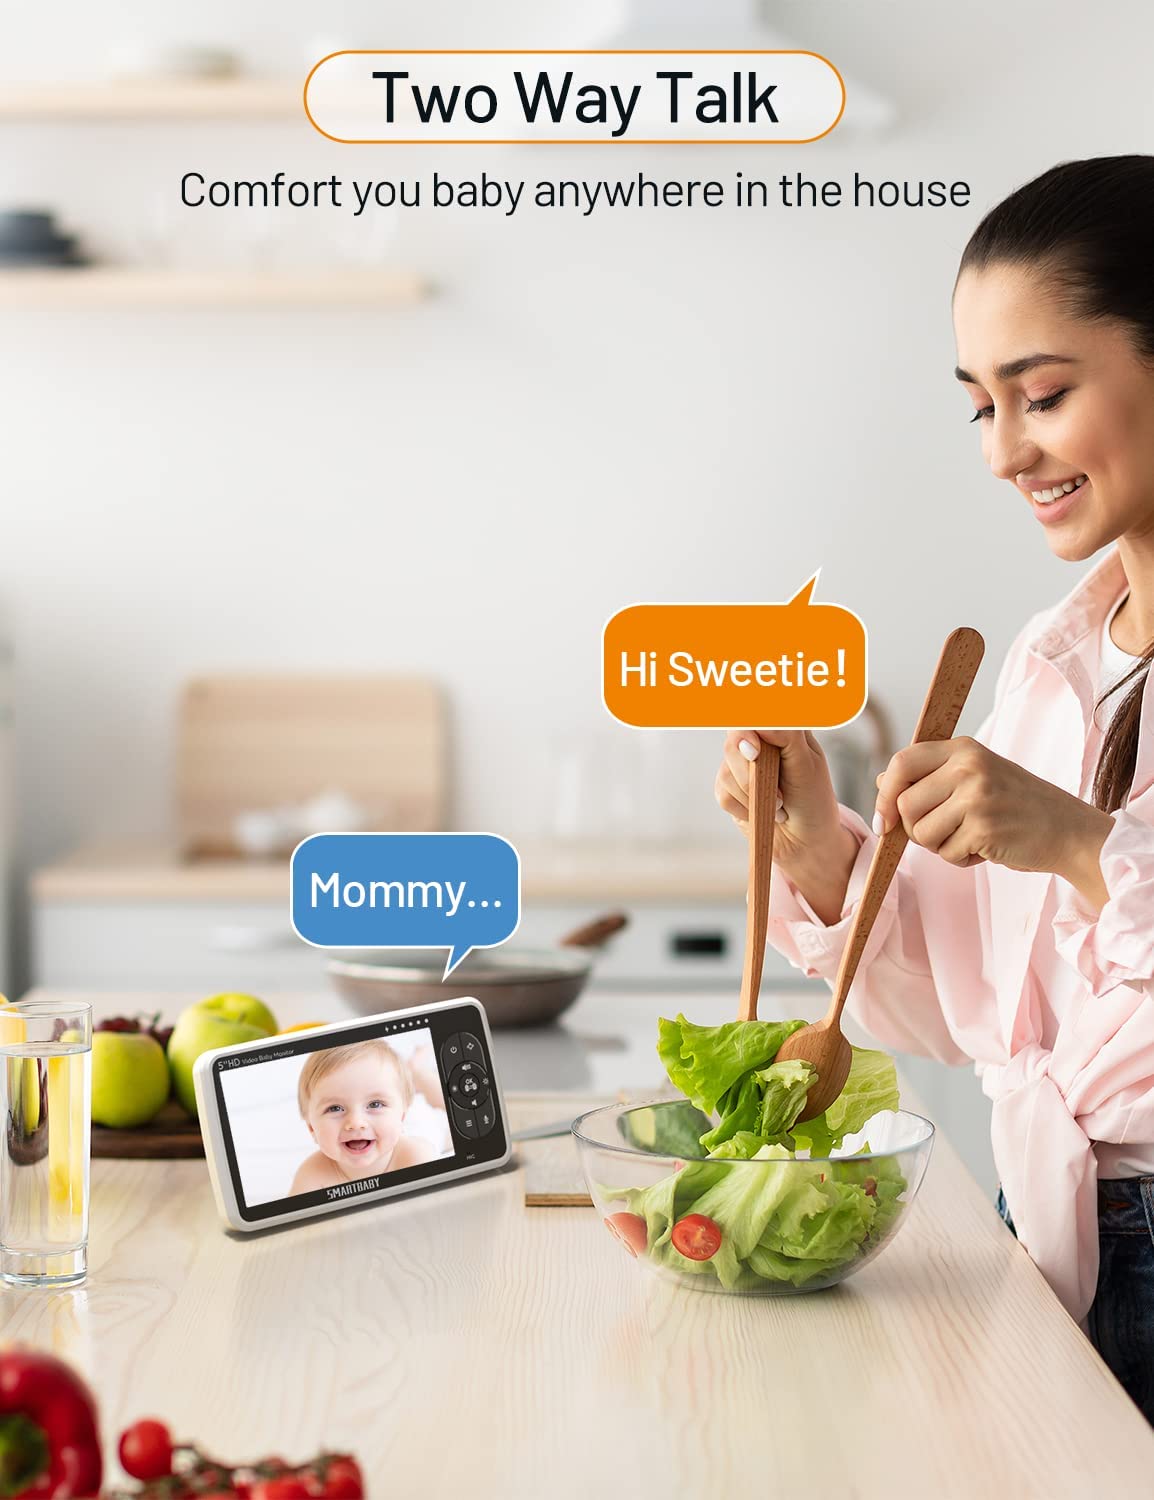 Benefits of using the baby monitor 2023 - Best Baby Monitor Guide